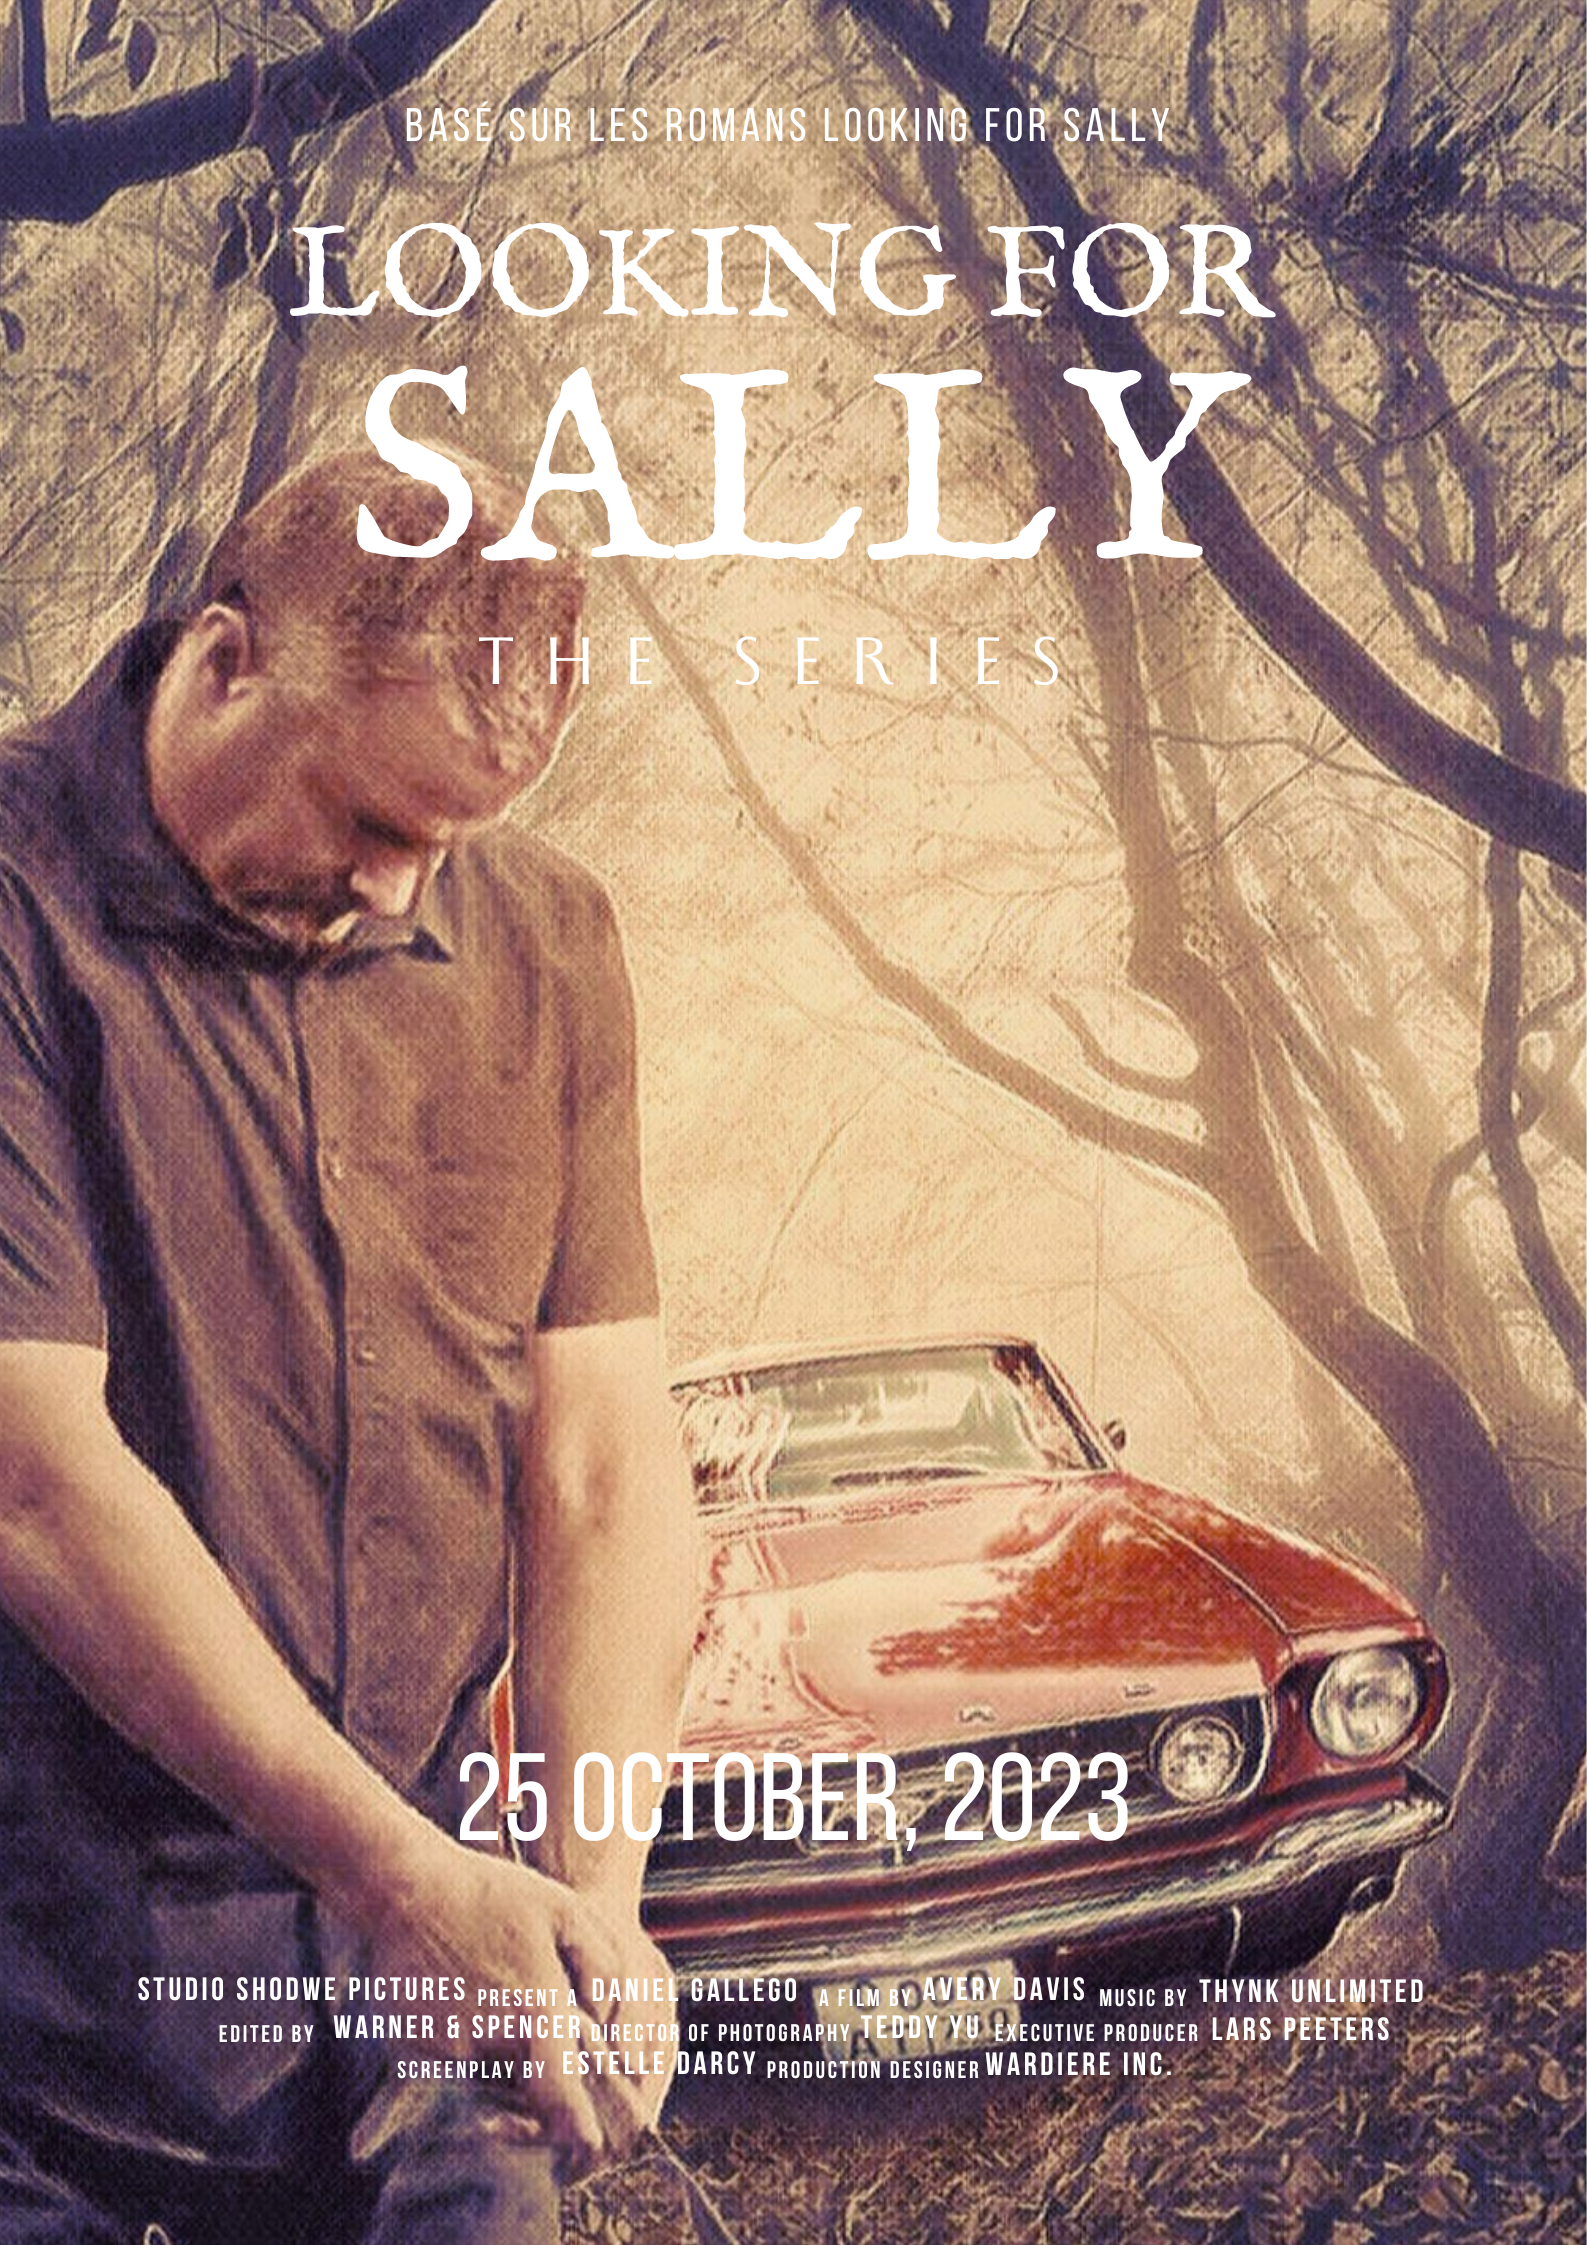 LOOKING FOR SALLY